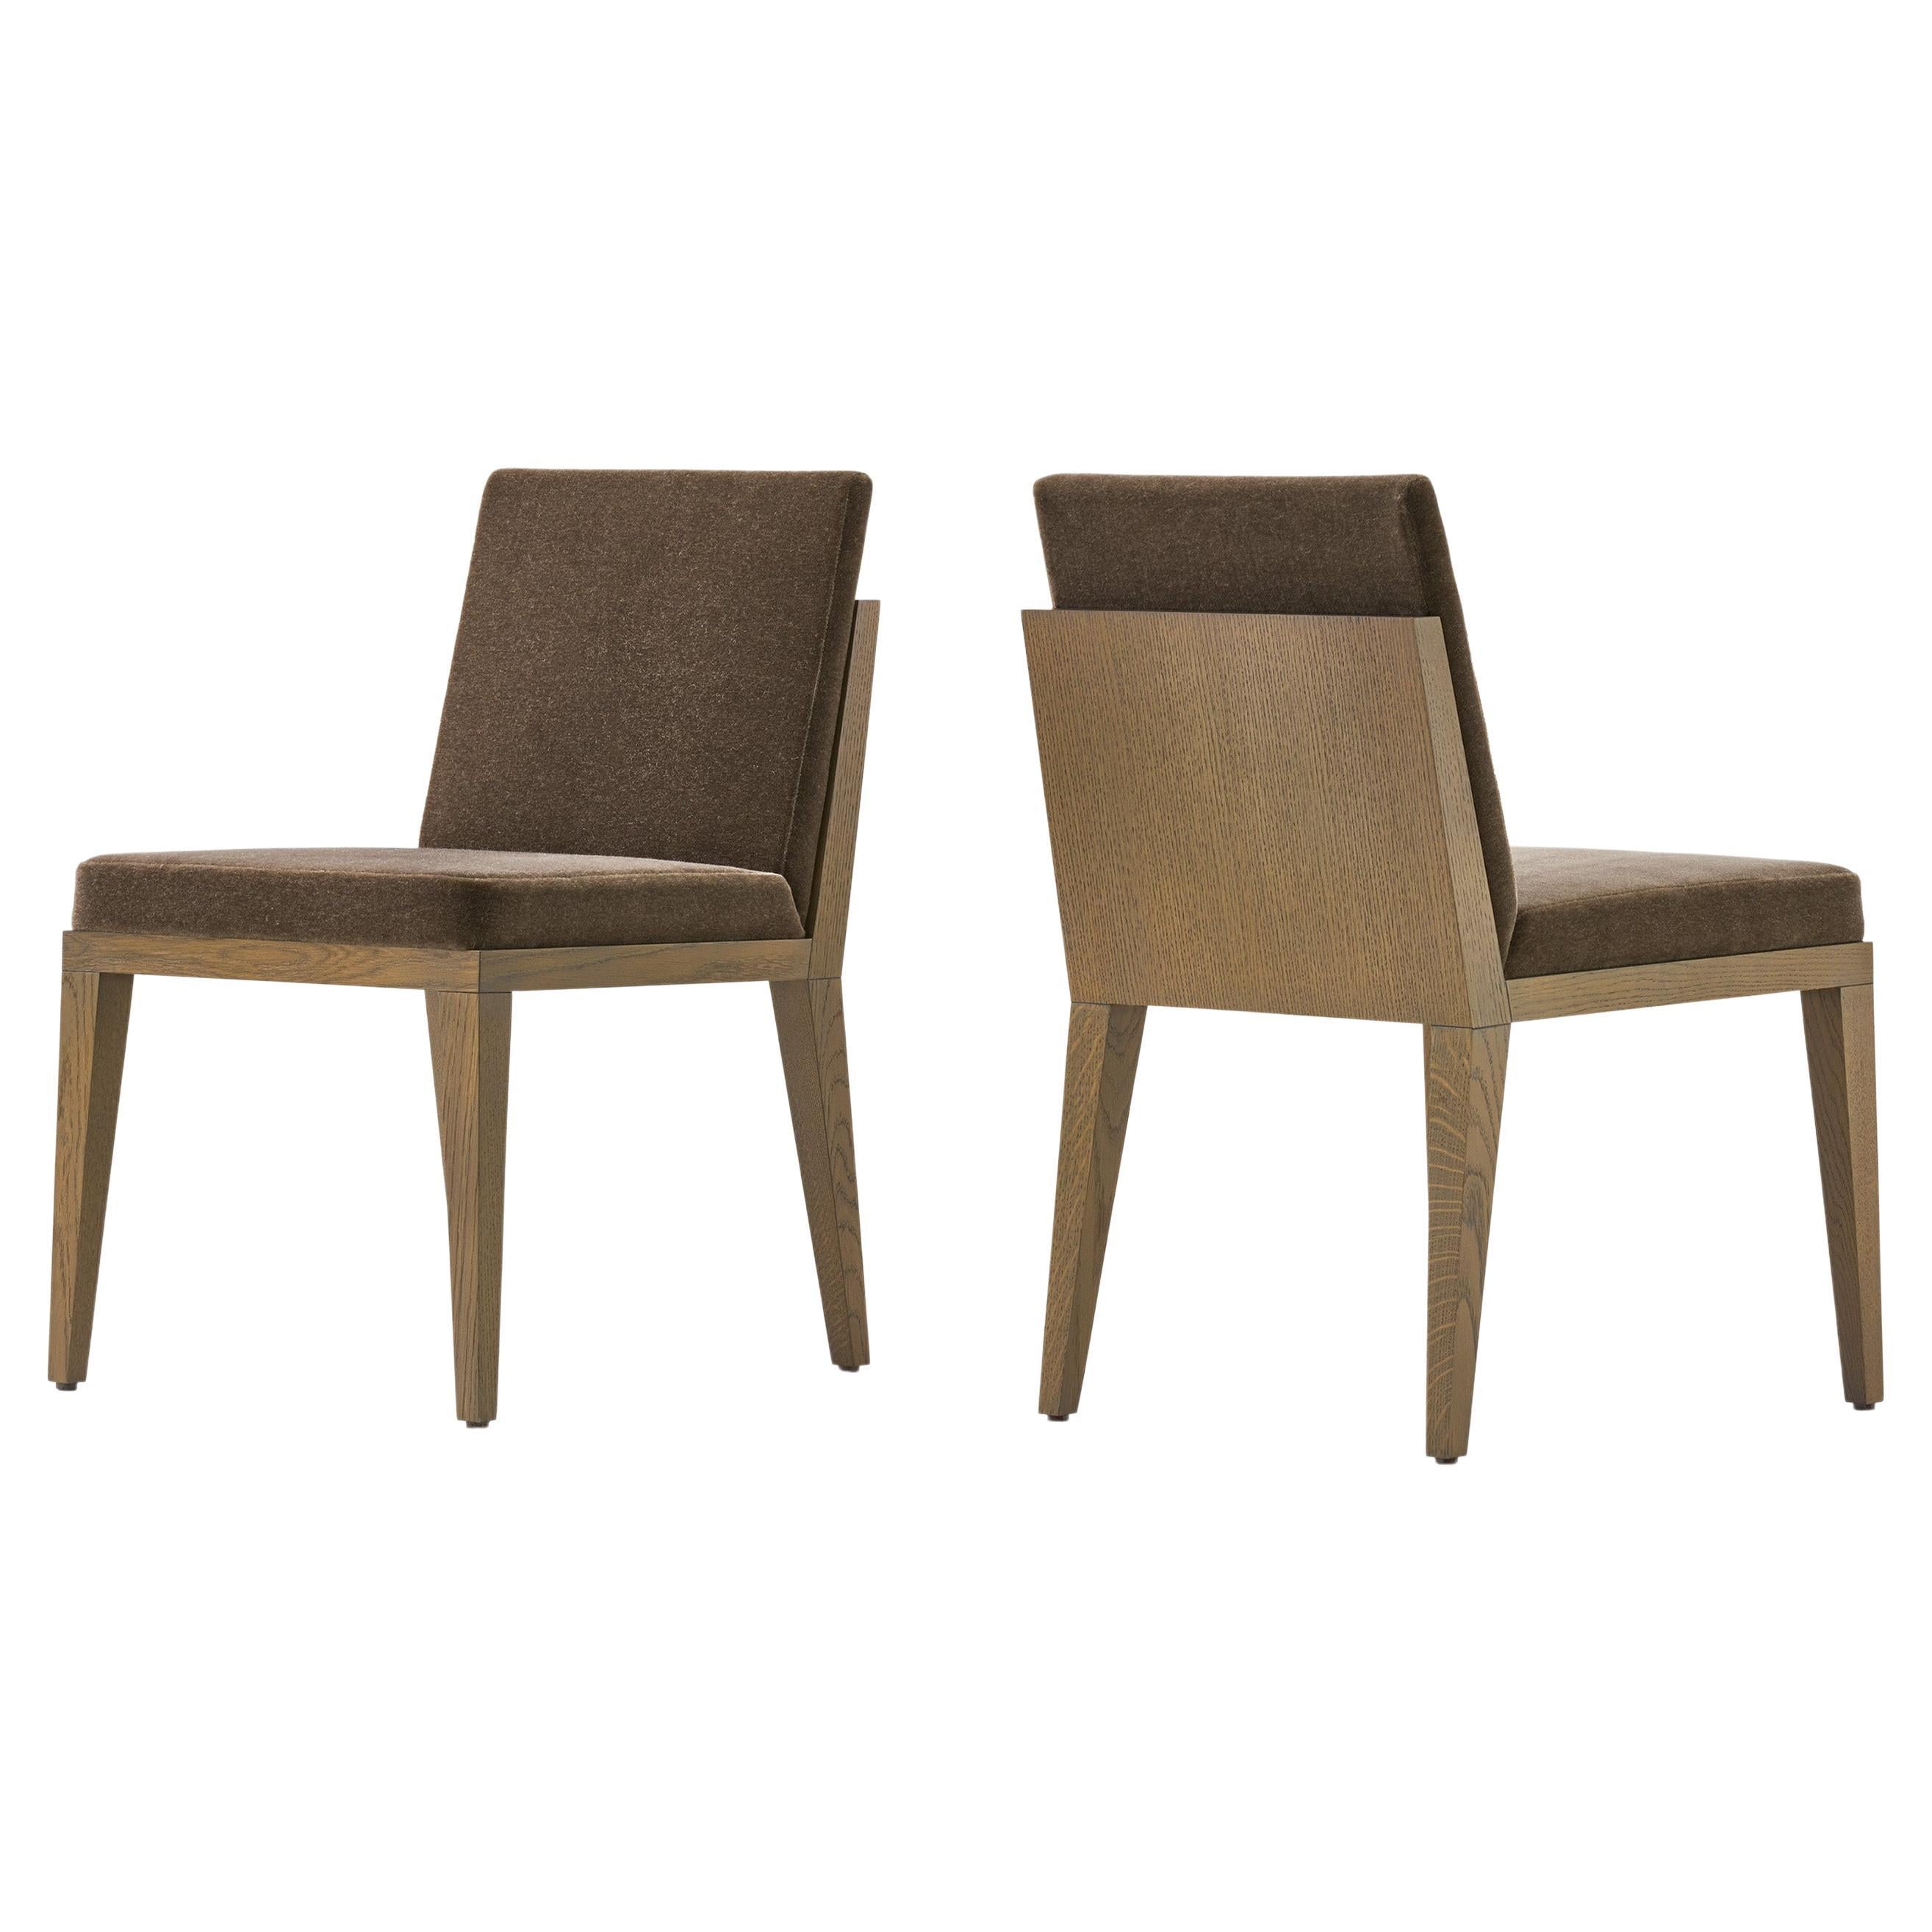 Structured Dining Chair in Mohair, Set of 2